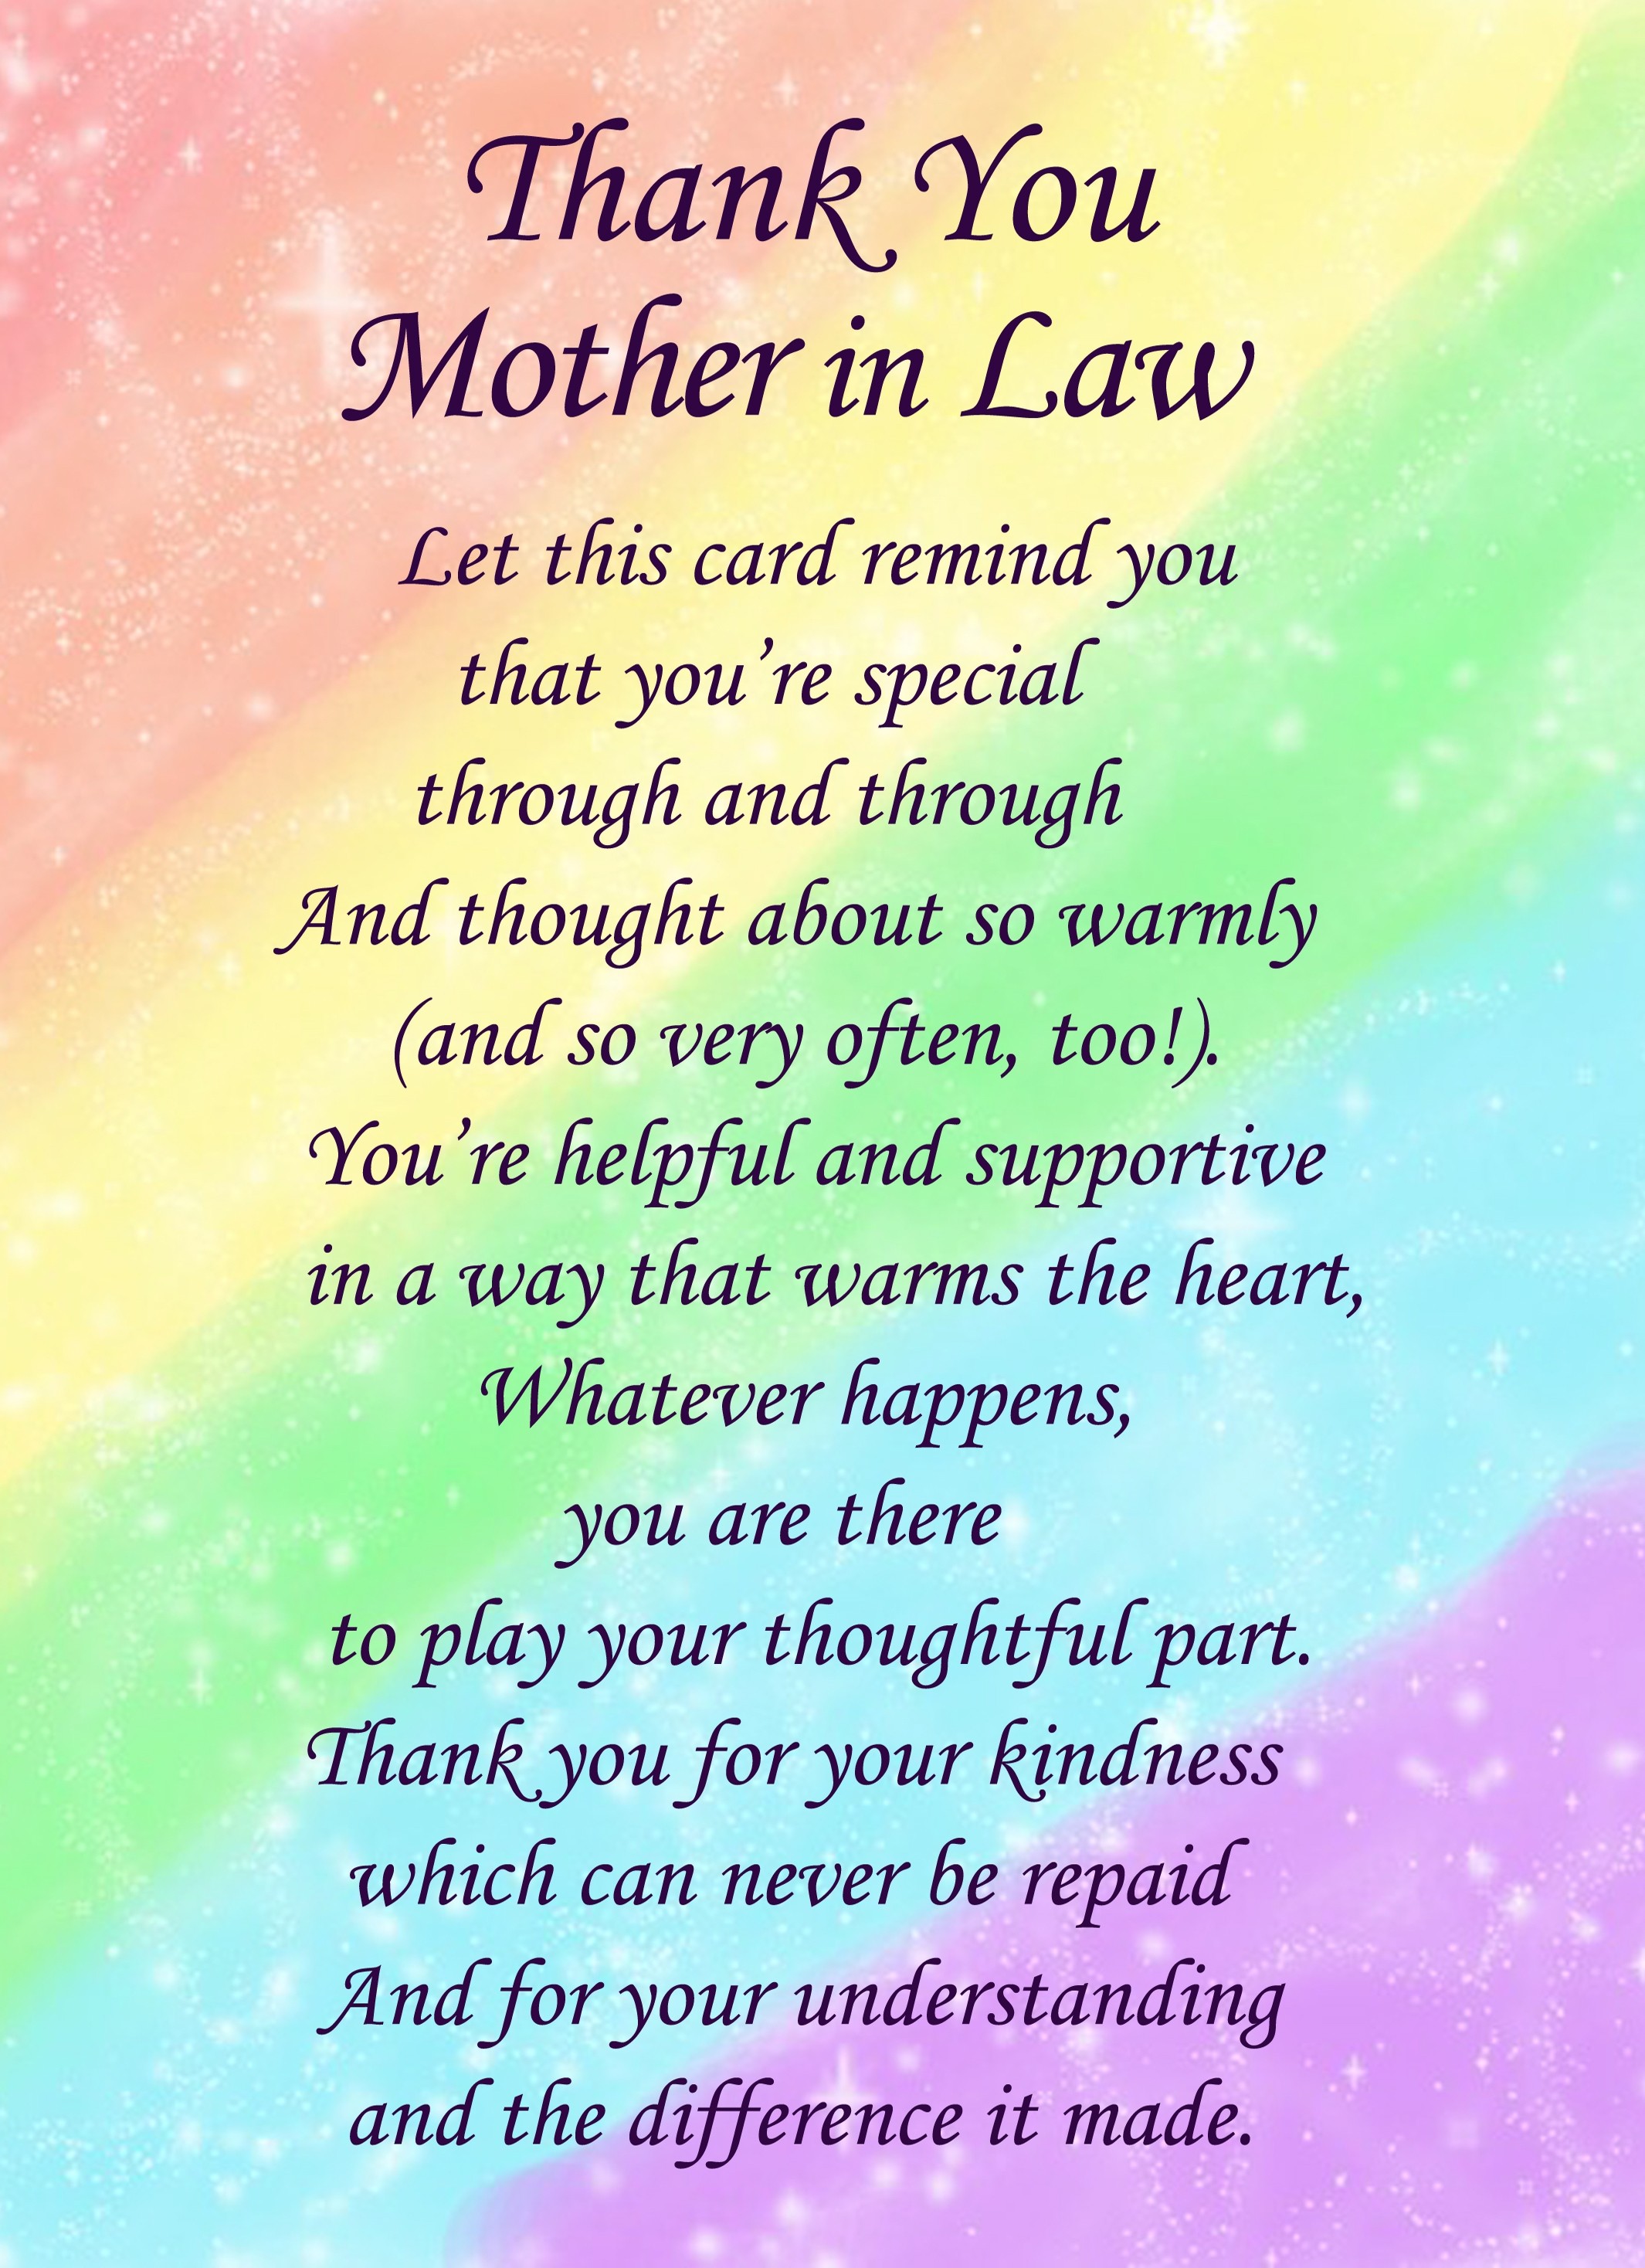 Thank You 'Mother in Law' Poem Verse Greeting Card